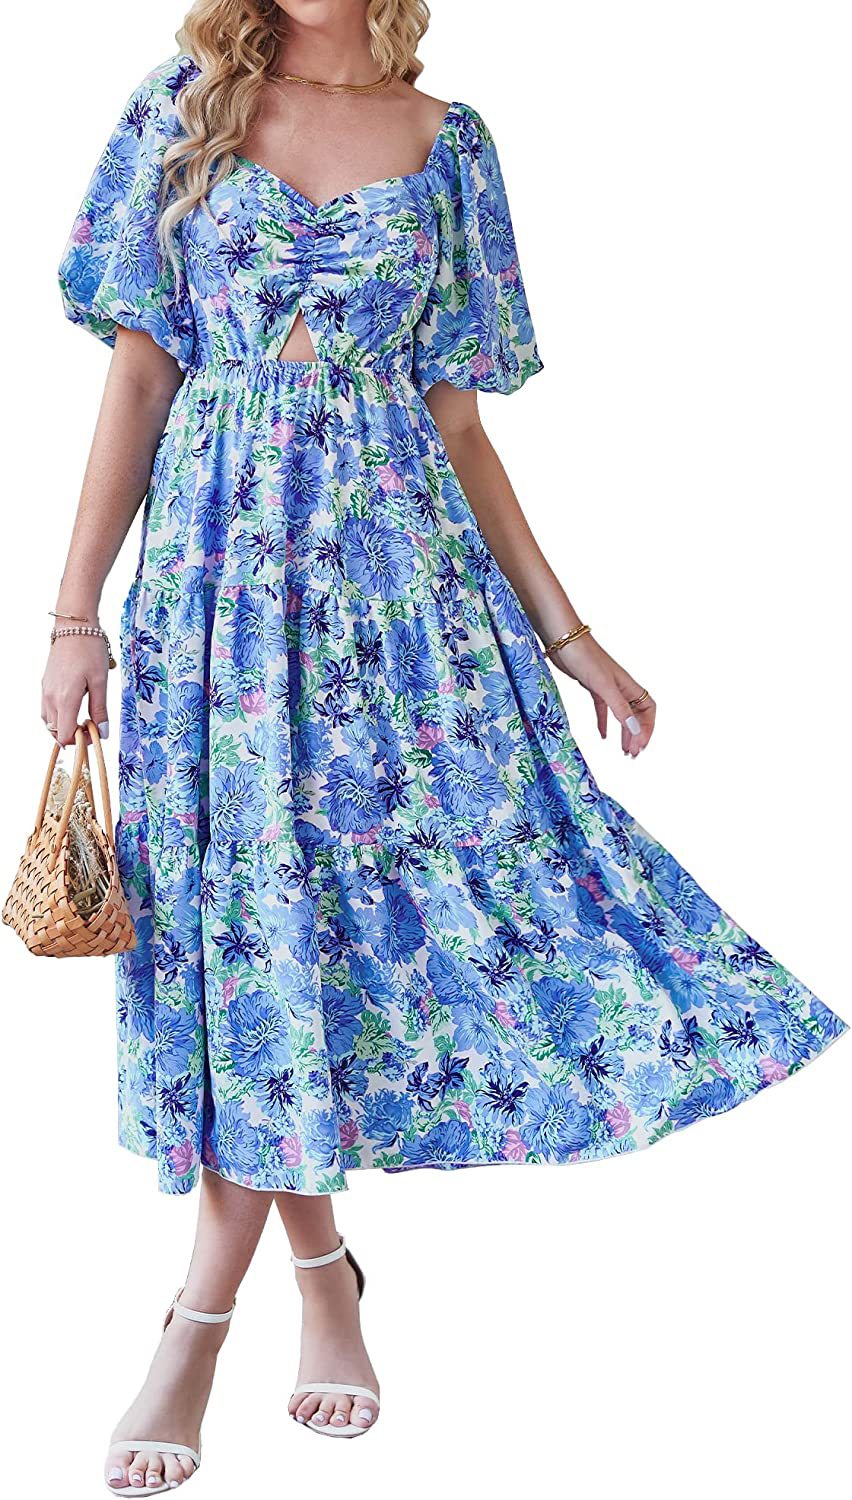 Women Summer Square Neck Bubble Short-Sleeved Back Pleated Printed Women's Dress - WD8038